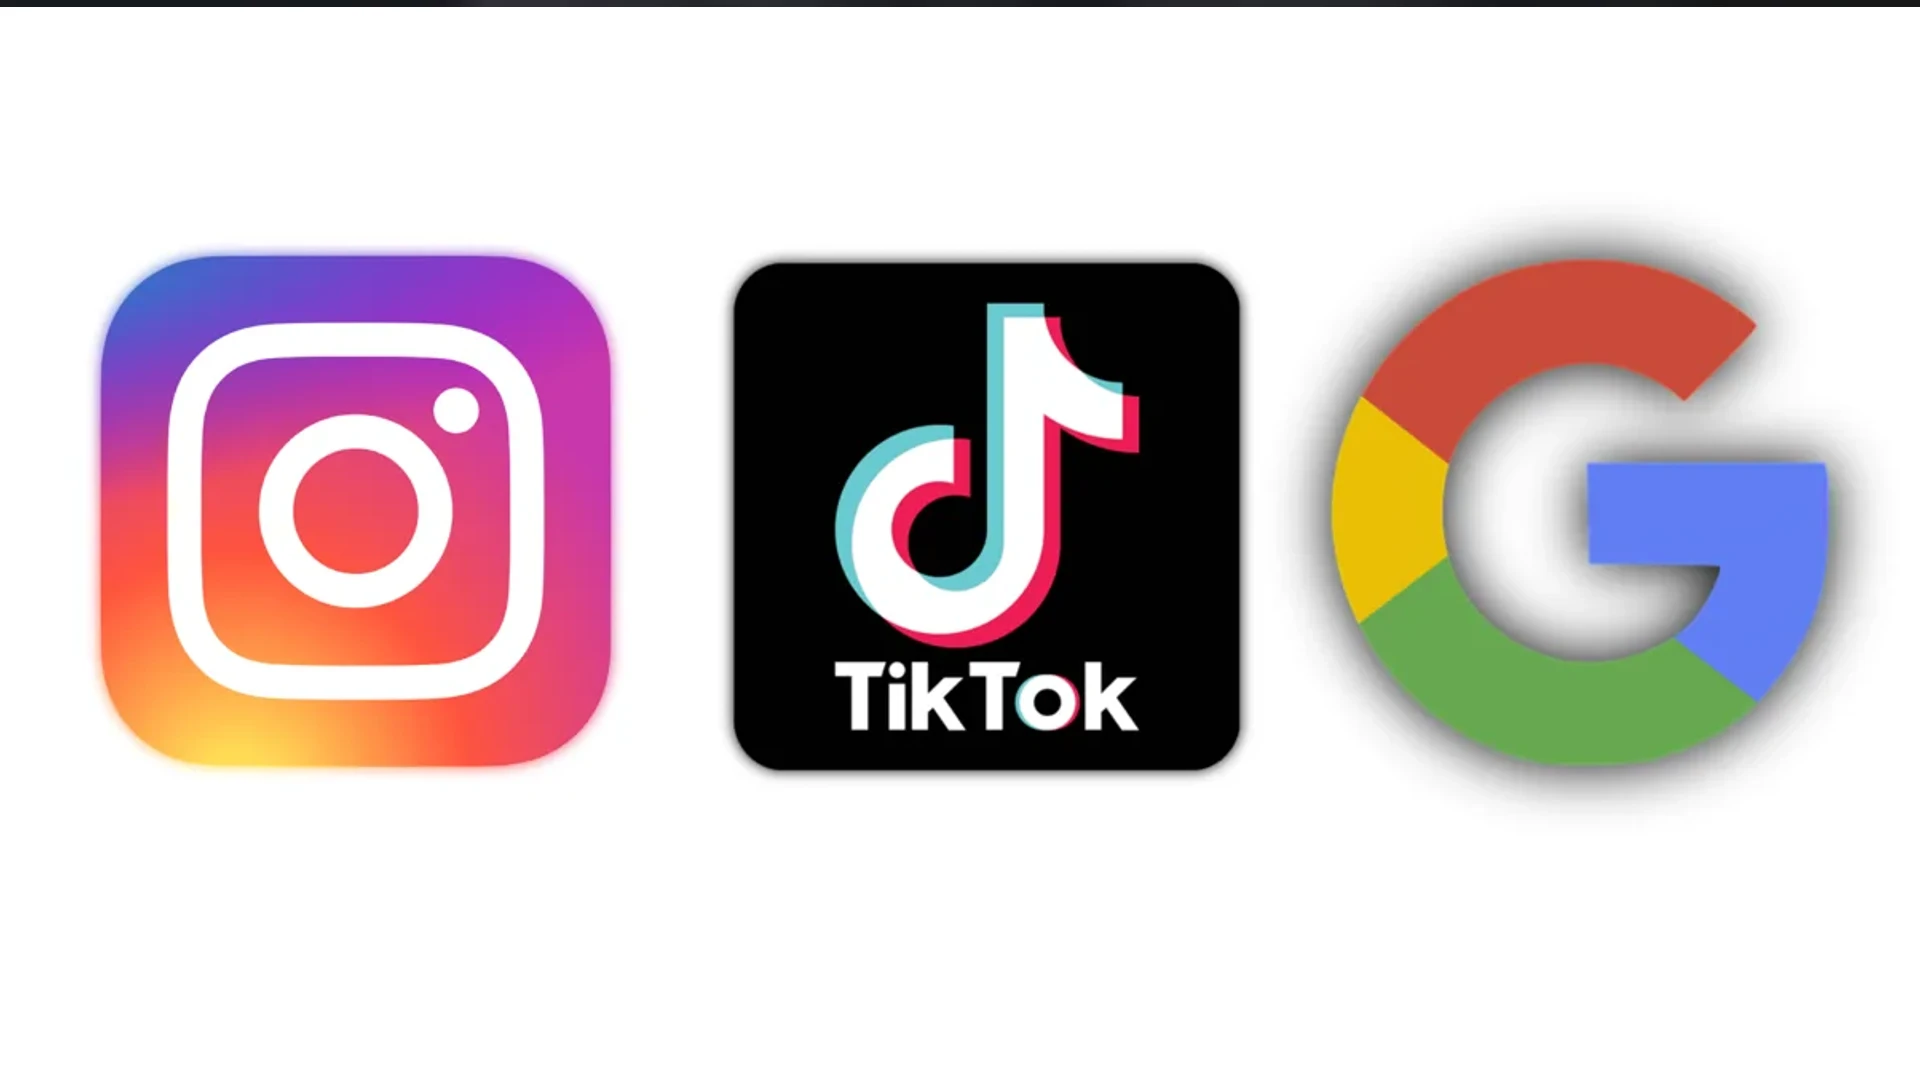 The New Search Engine Is TikTok And Instagram! 40% Of Gen Z Use Social Media Instead Of Google